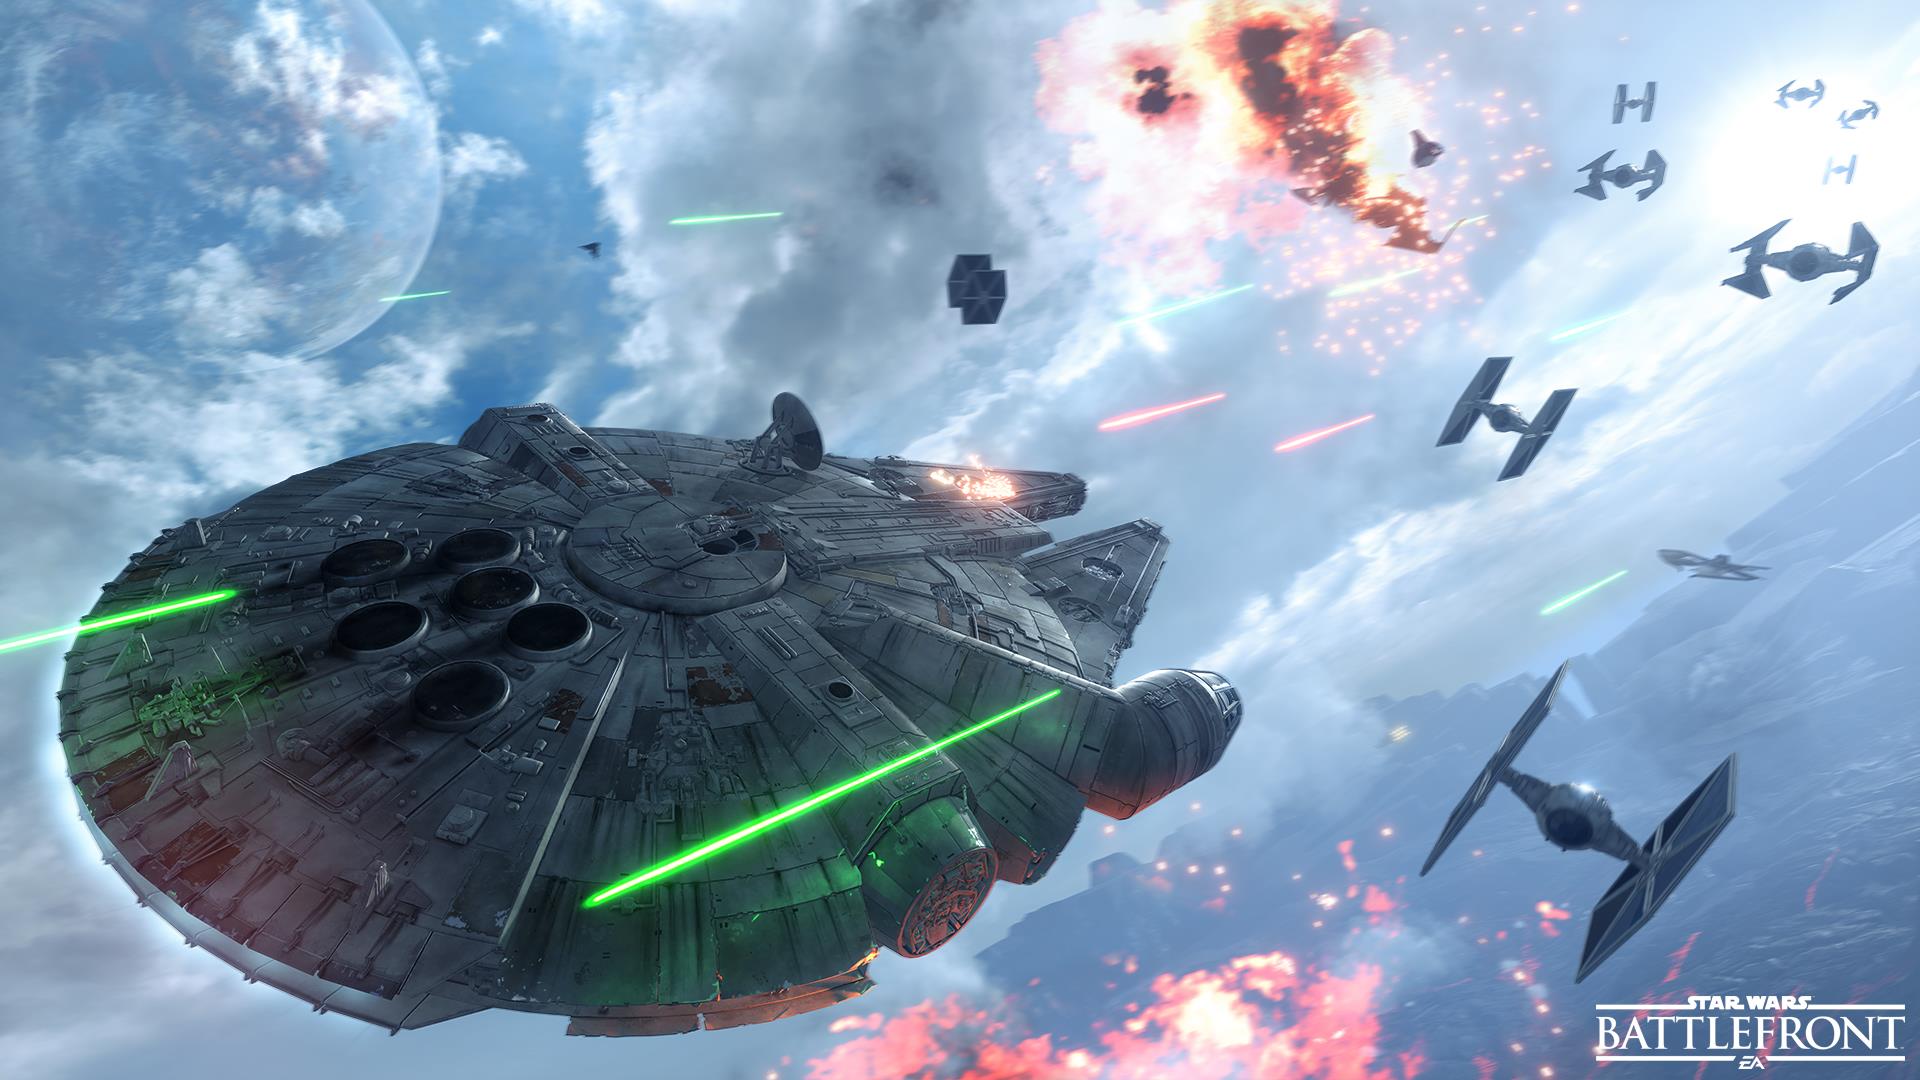 Image for EA gamescom 2015: Star Wars Battlefront, Mirror's Edge Catalyst, Need for Speed - all the news